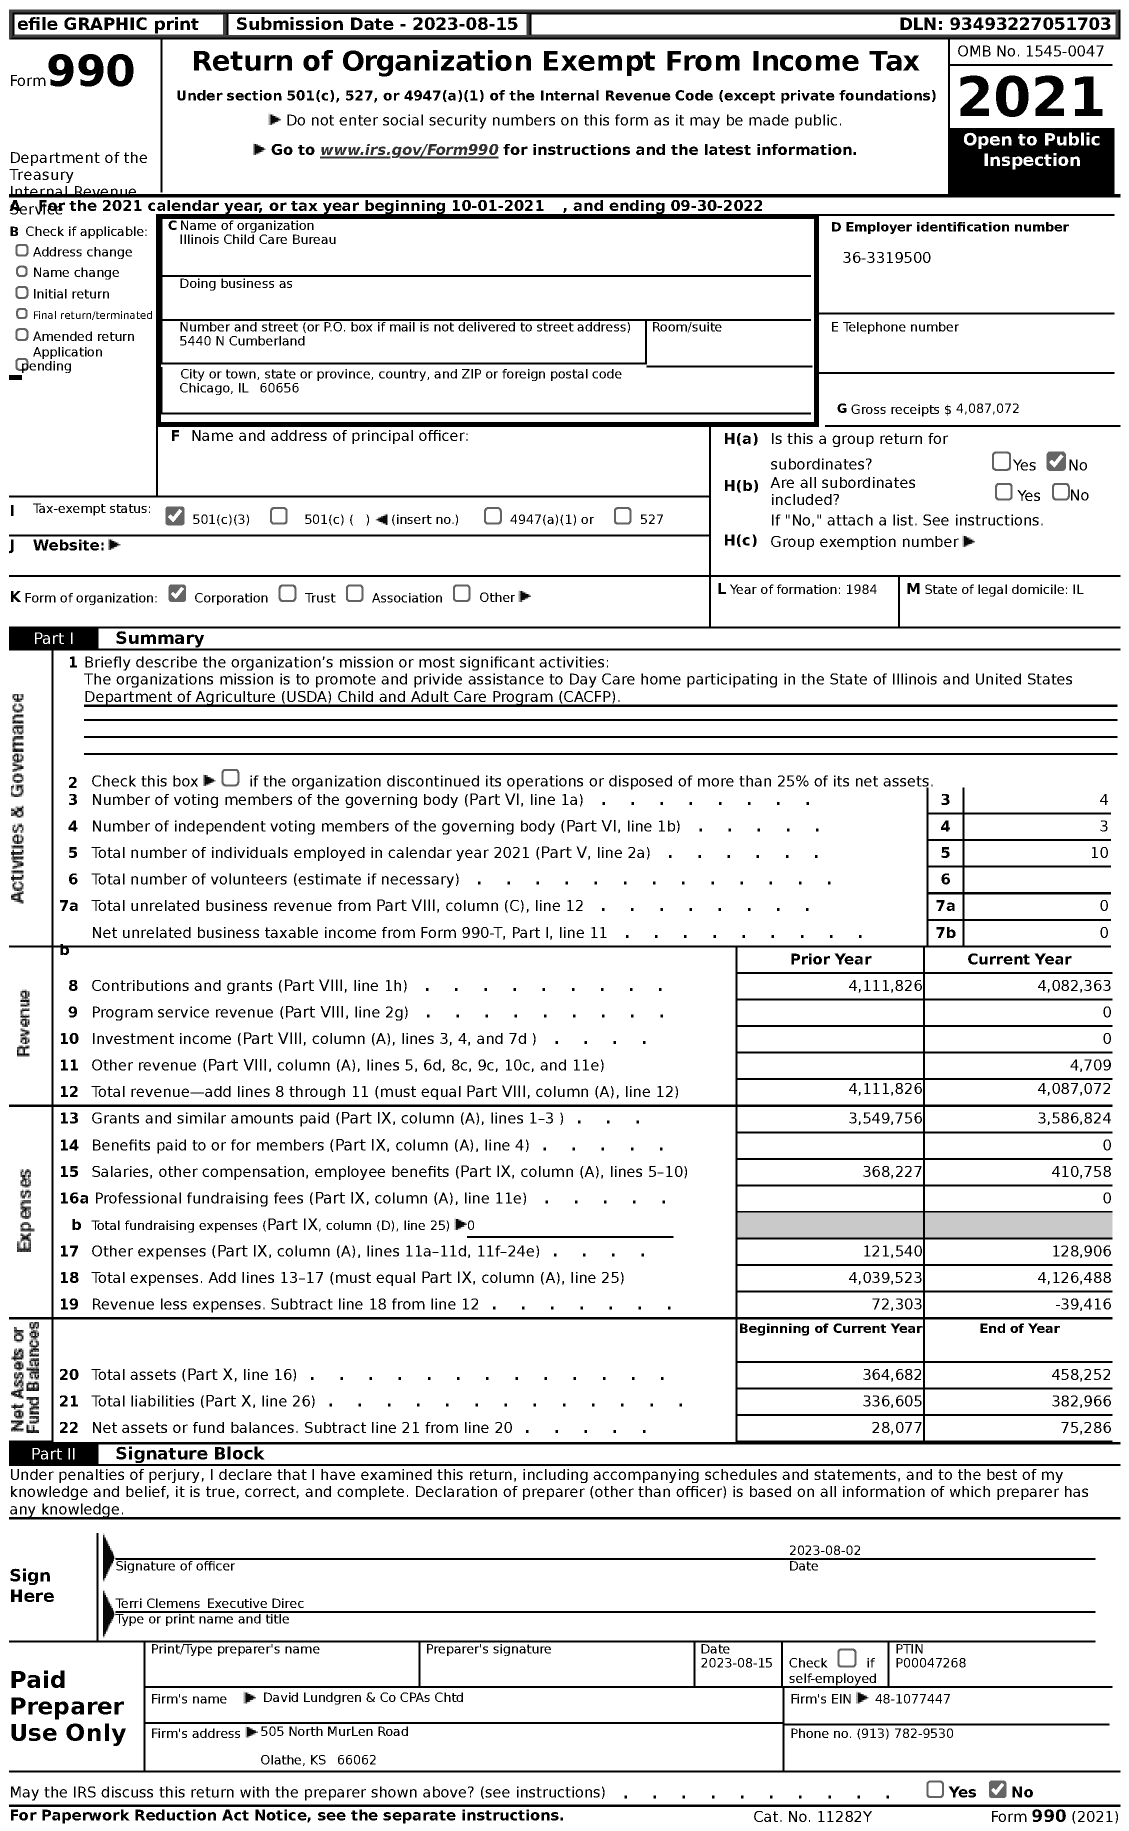 Image of first page of 2021 Form 990 for Illinois Child Care Bureau (ICCB)